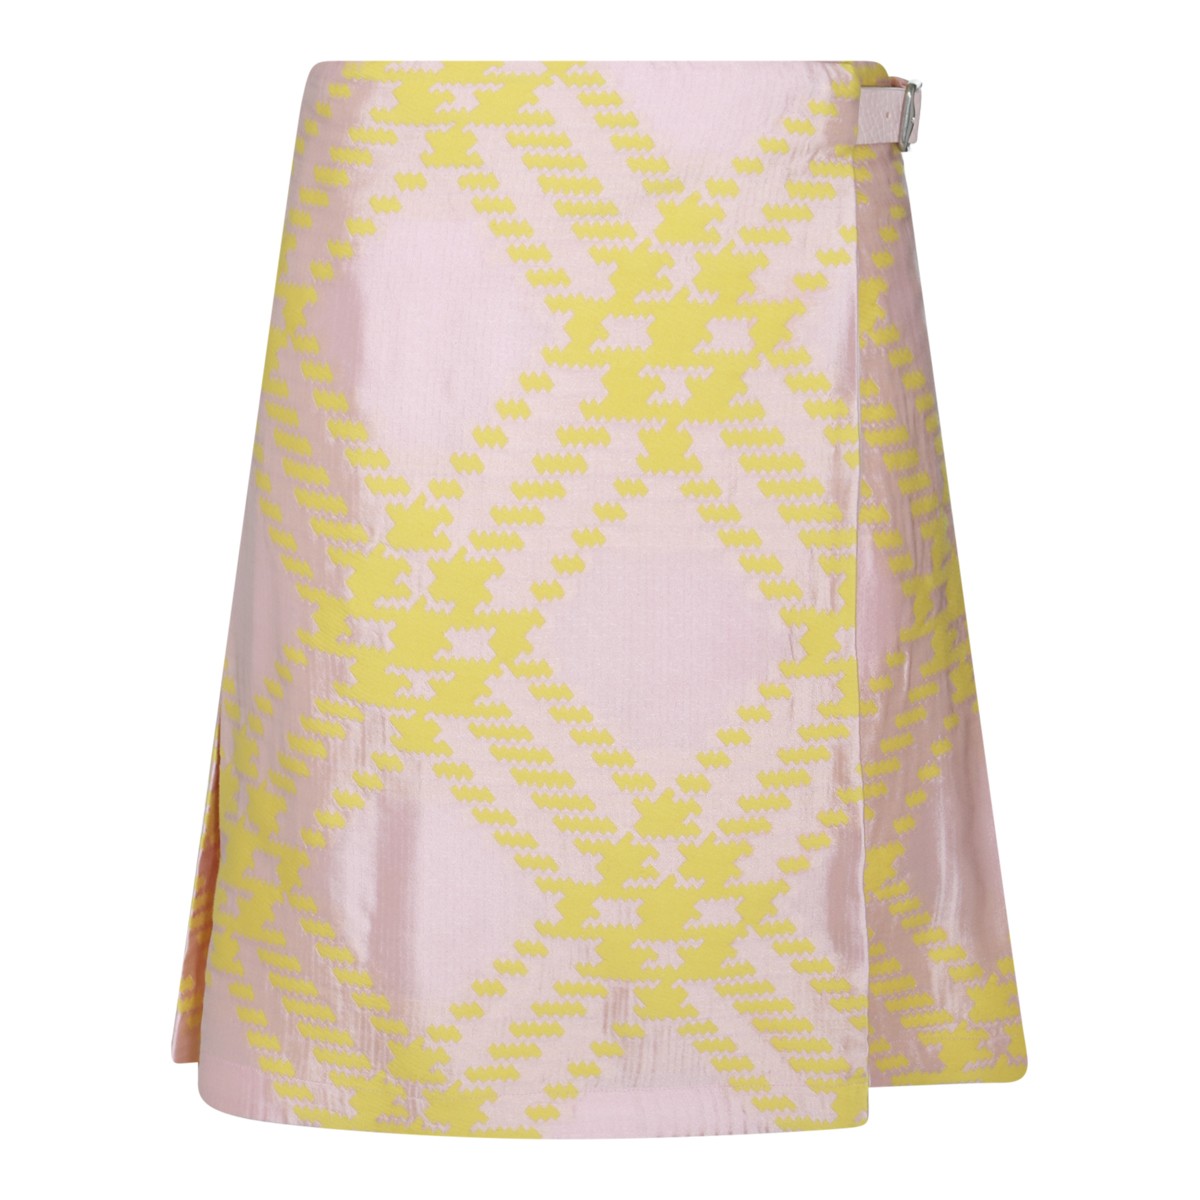 PINK AND YELLOW COTTON SKIRT